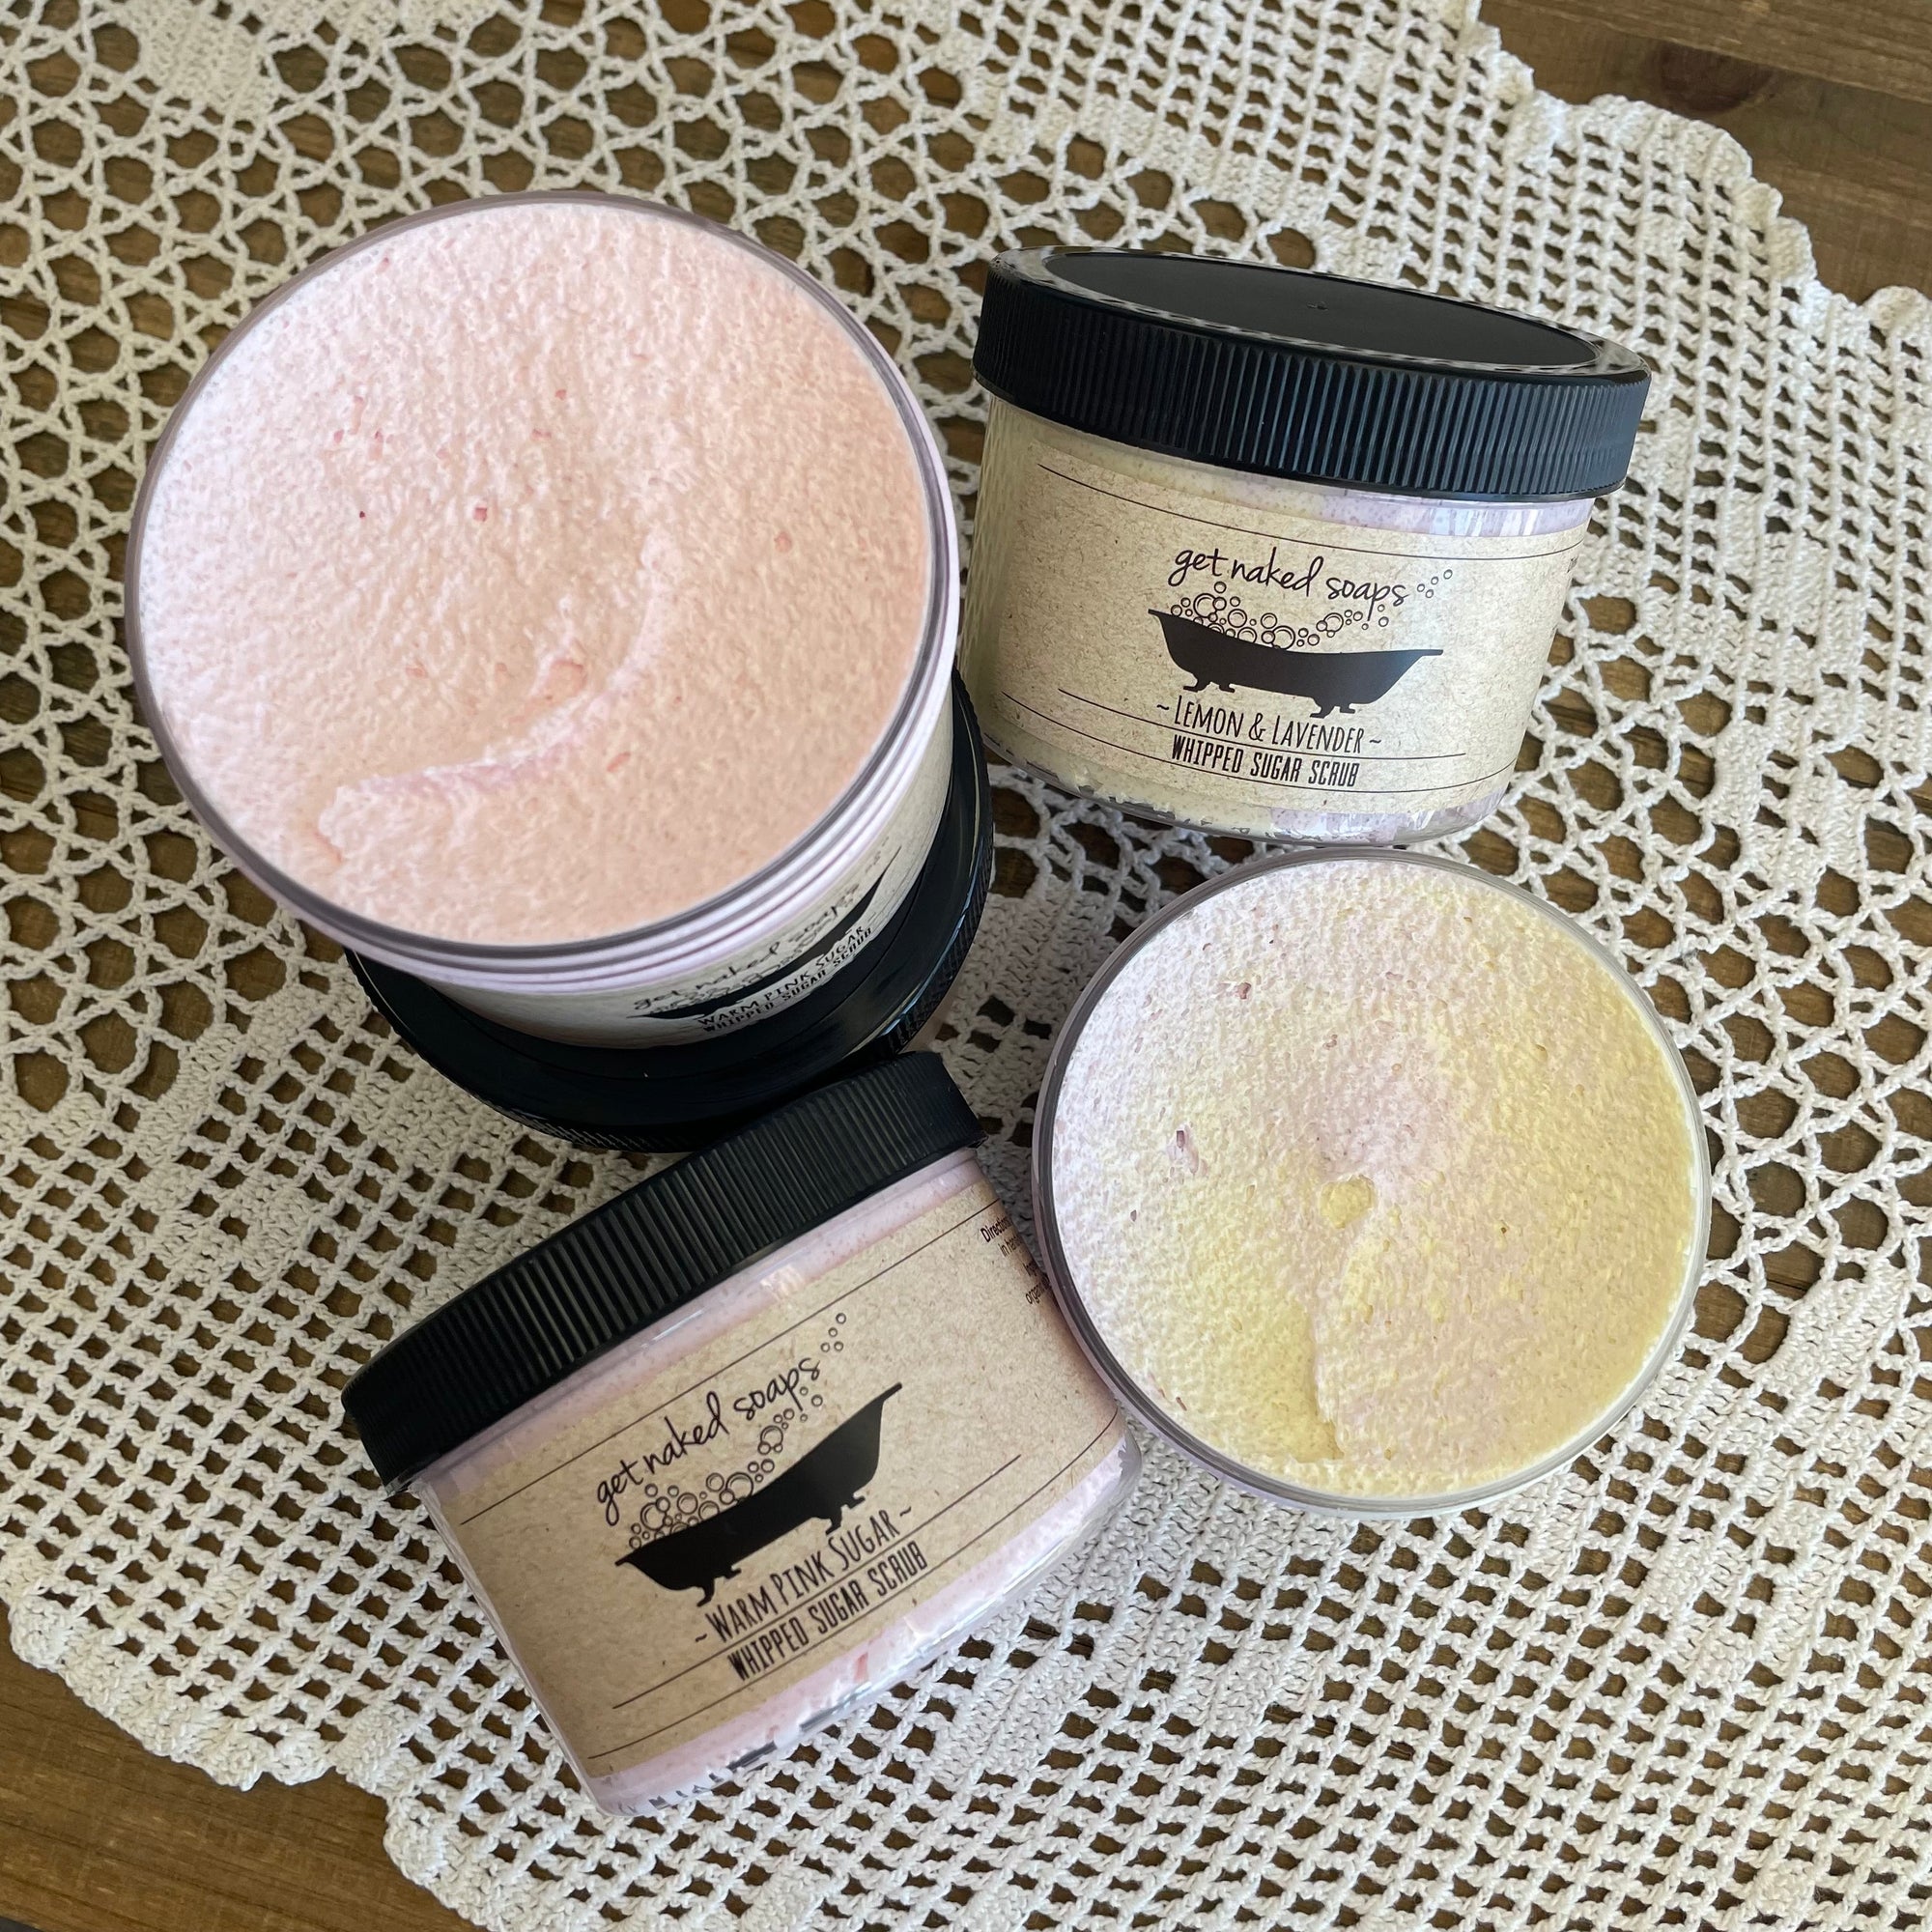 Get Naked Soaps | Whipped Sugar Scrubs